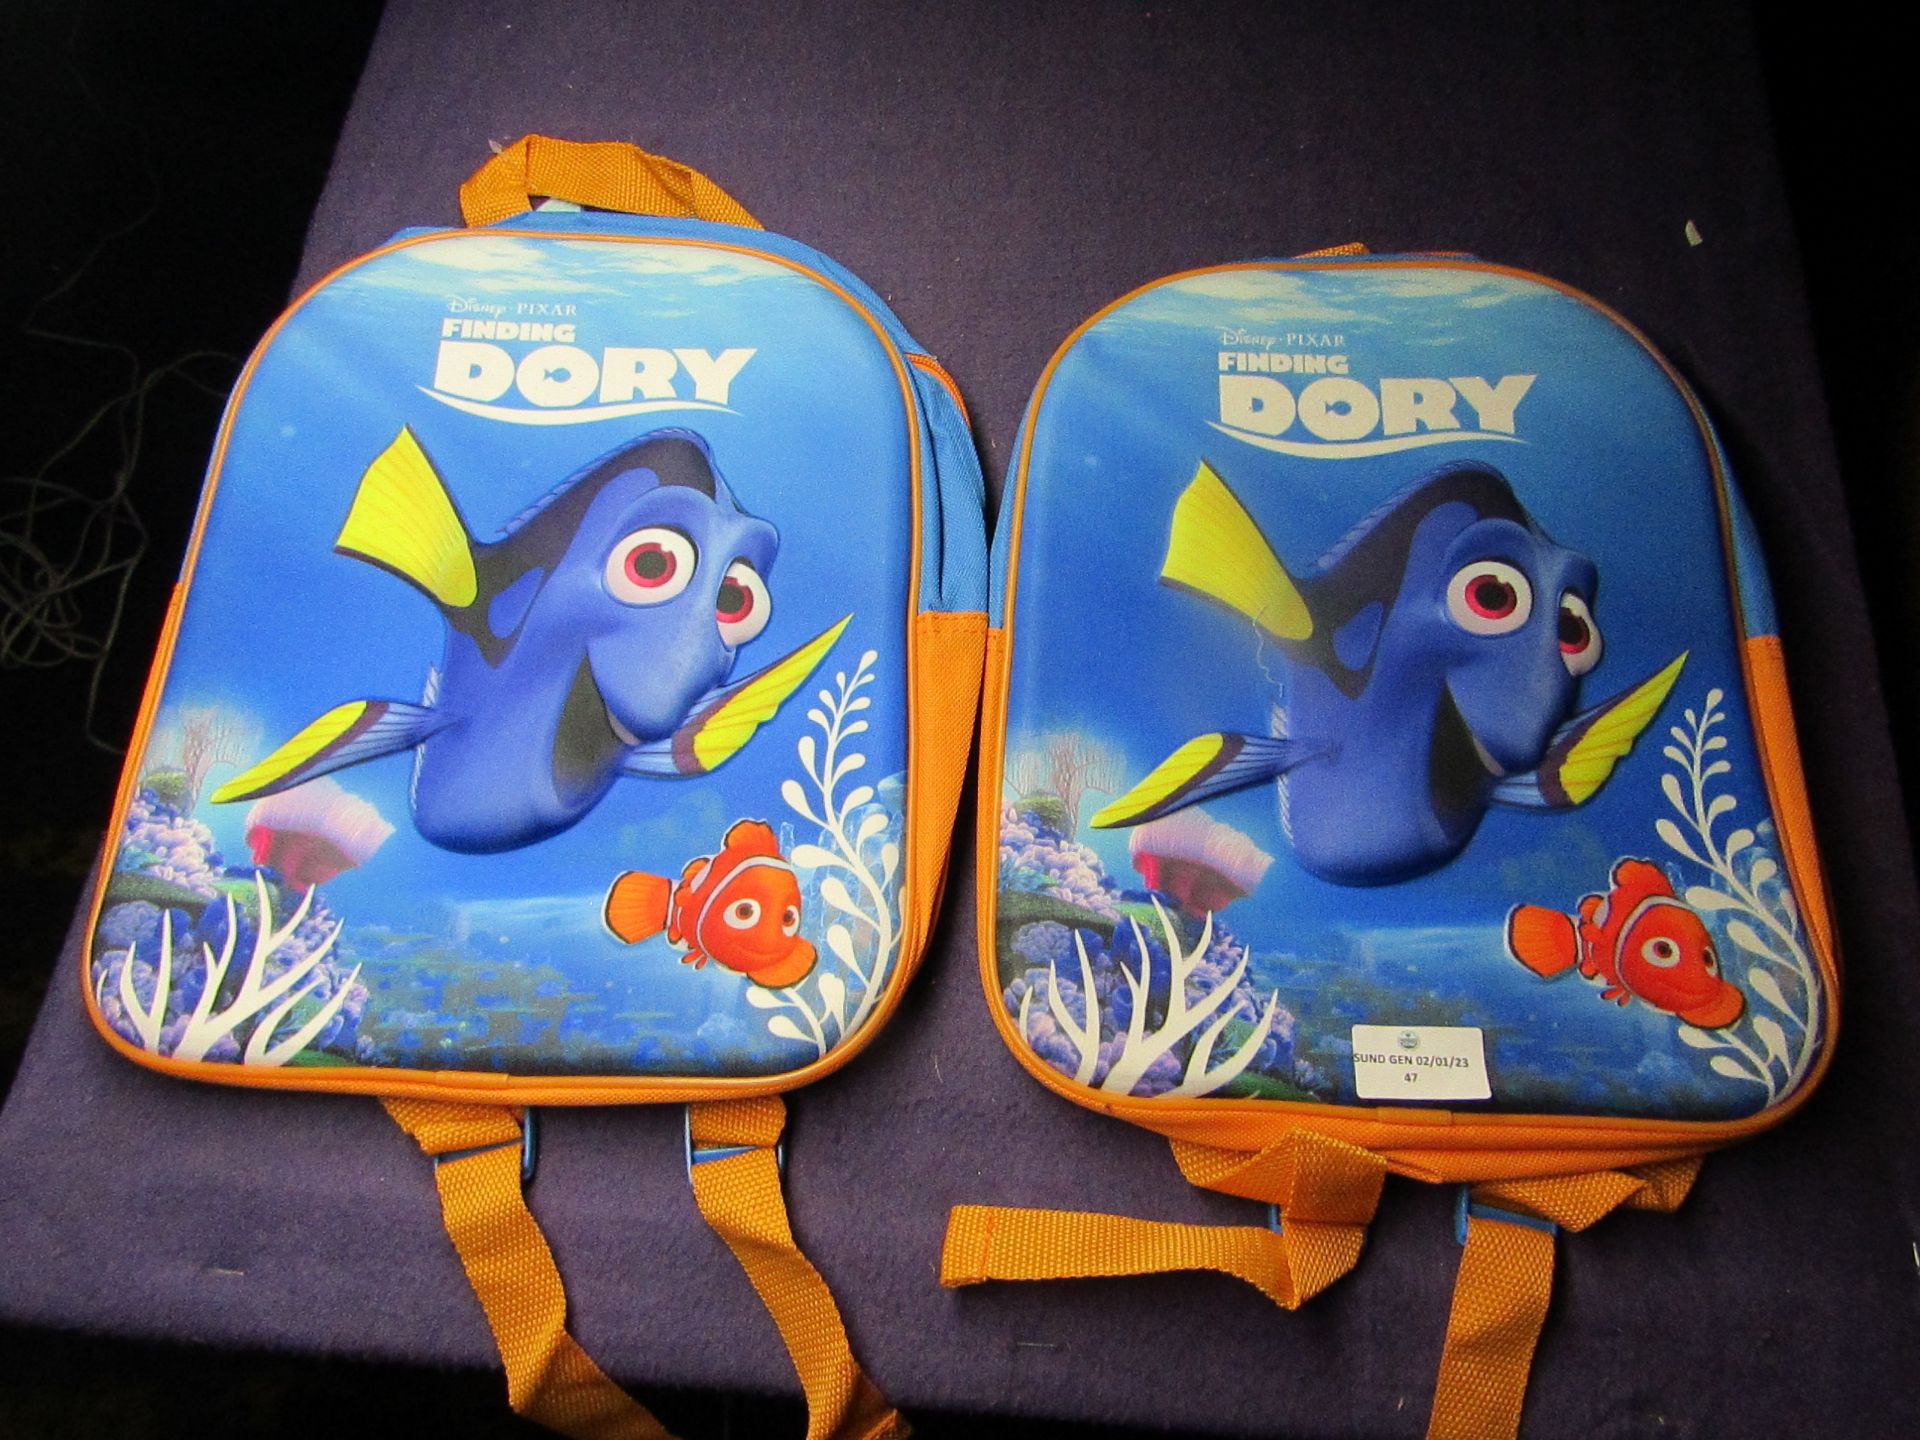 2x Finding Dory - 3D Backpack - Unused, No Packaging.